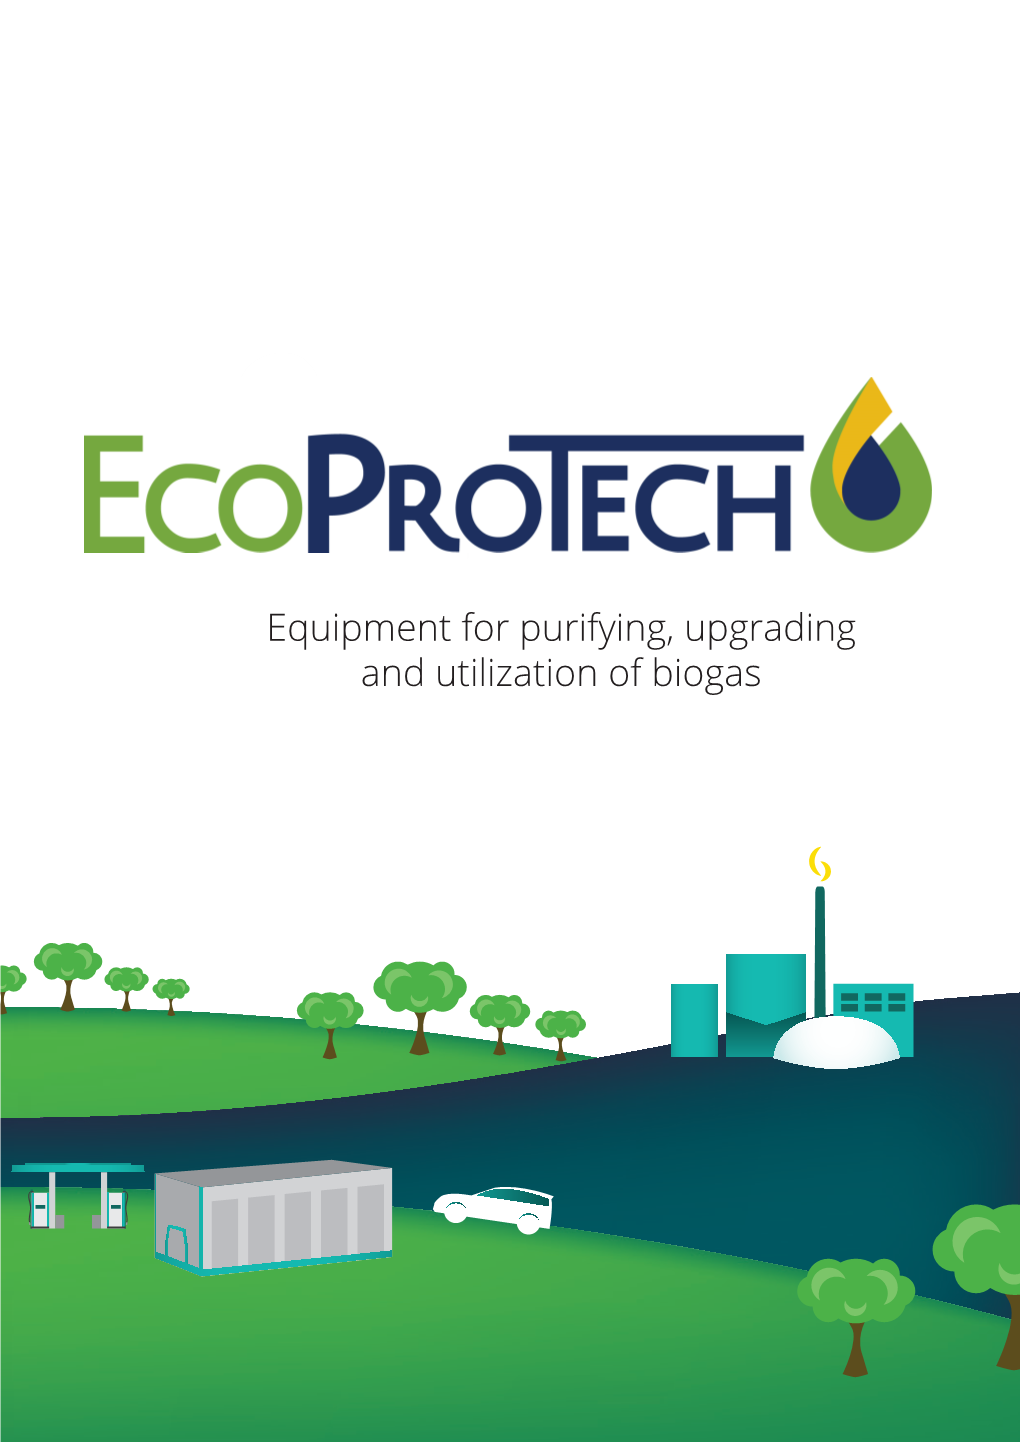 Equipment for Purifying, Upgrading and Utilization of Biogas Sludge & Food Waste